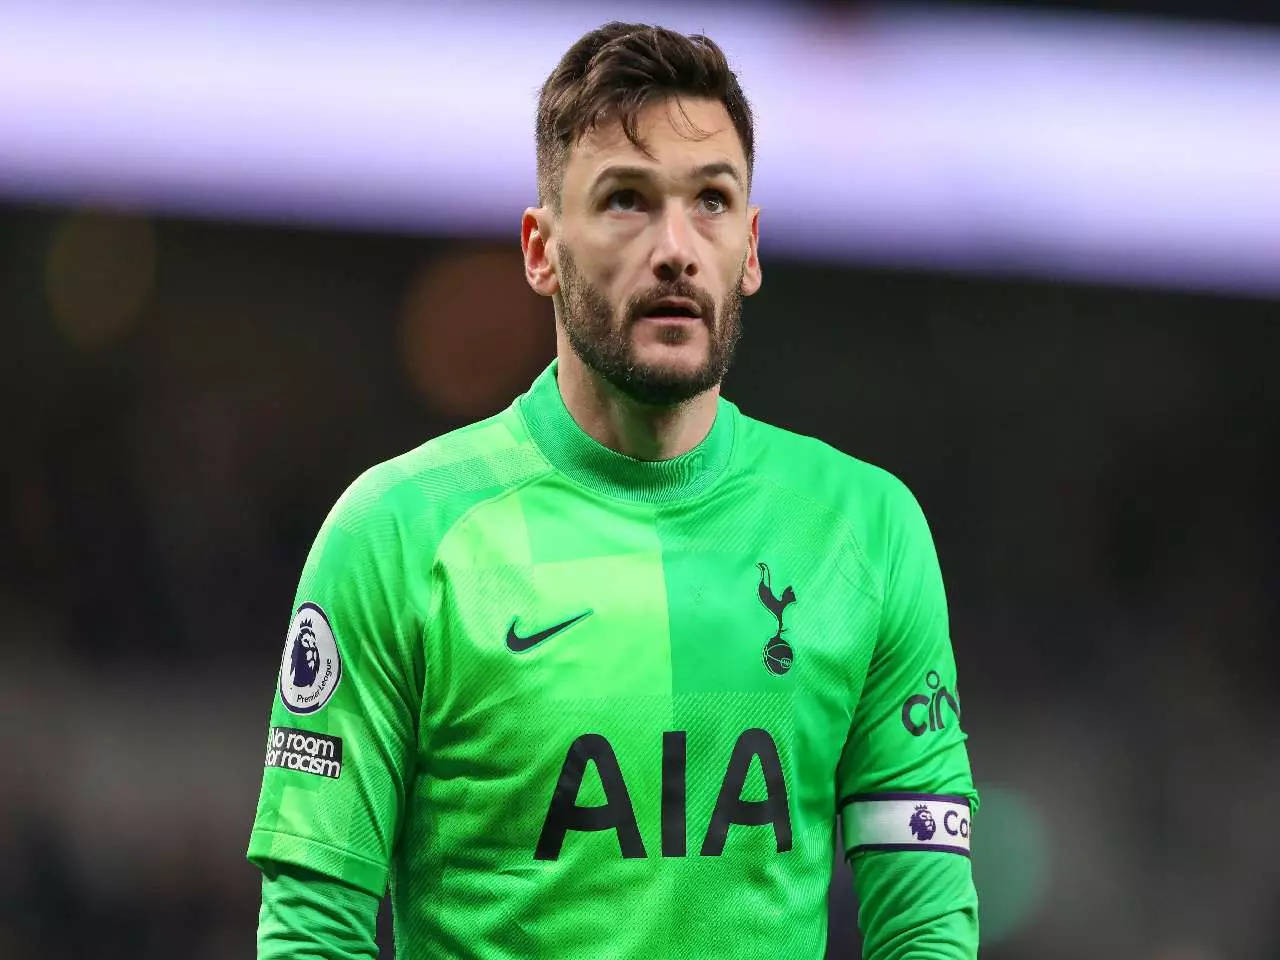 Caption: Hugo Lloris in Action with his Green Jersey Wallpaper